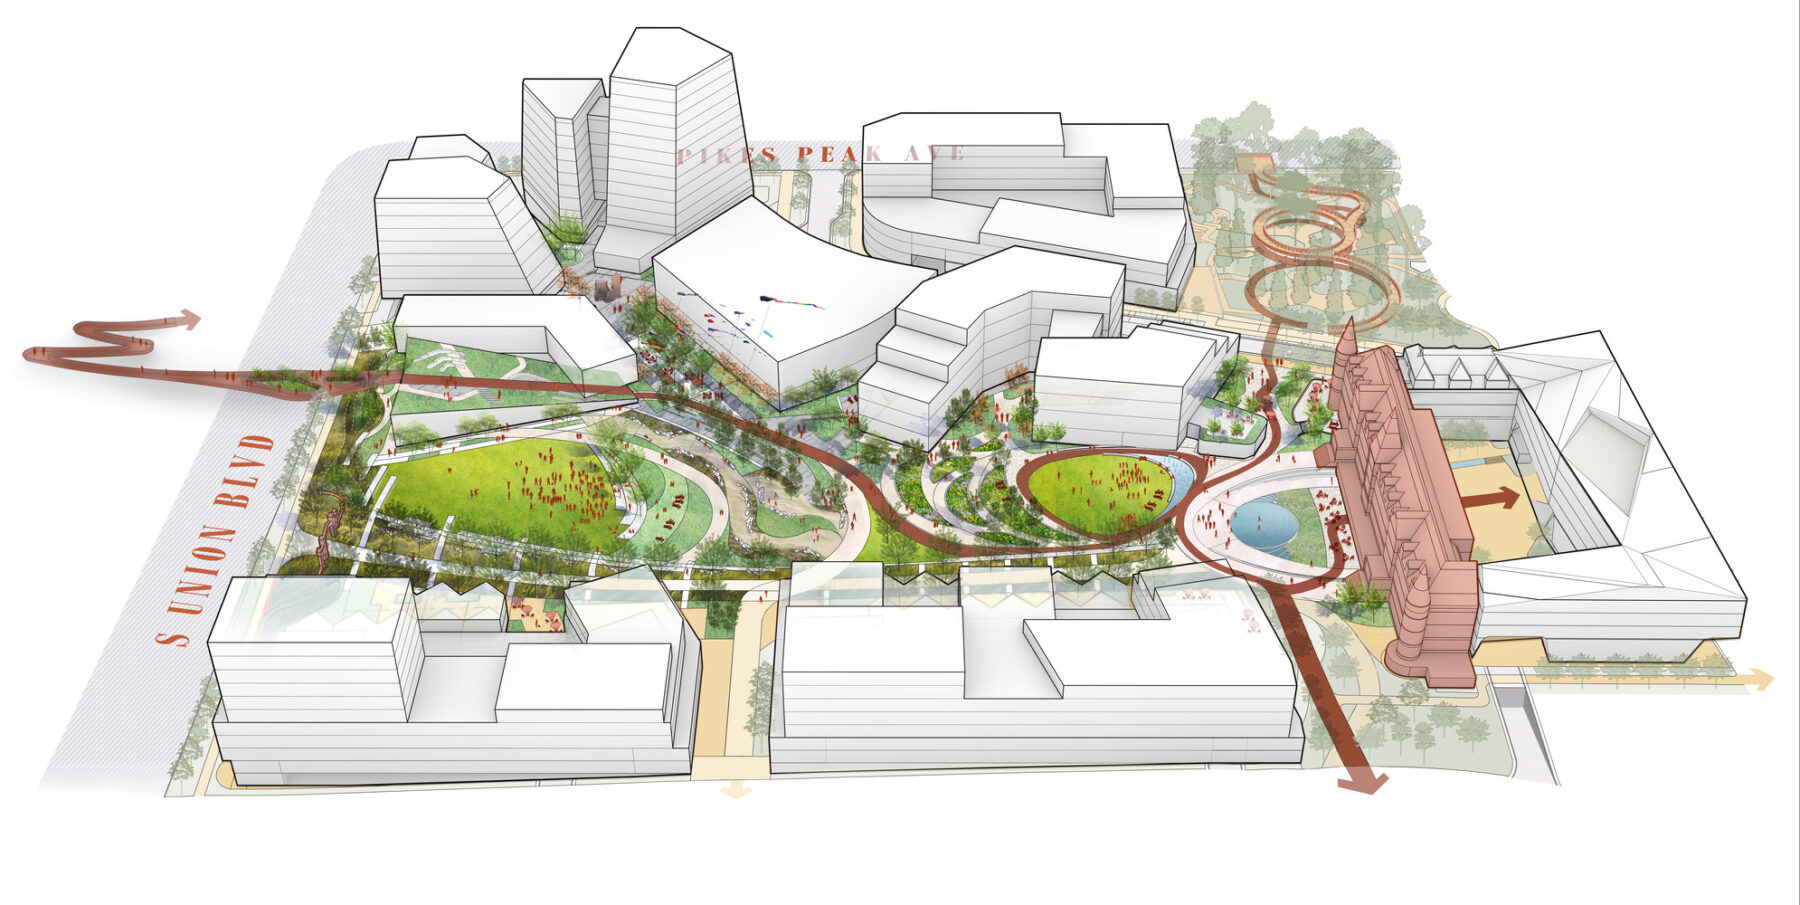 Illustrated diagram with development massings and central open green space